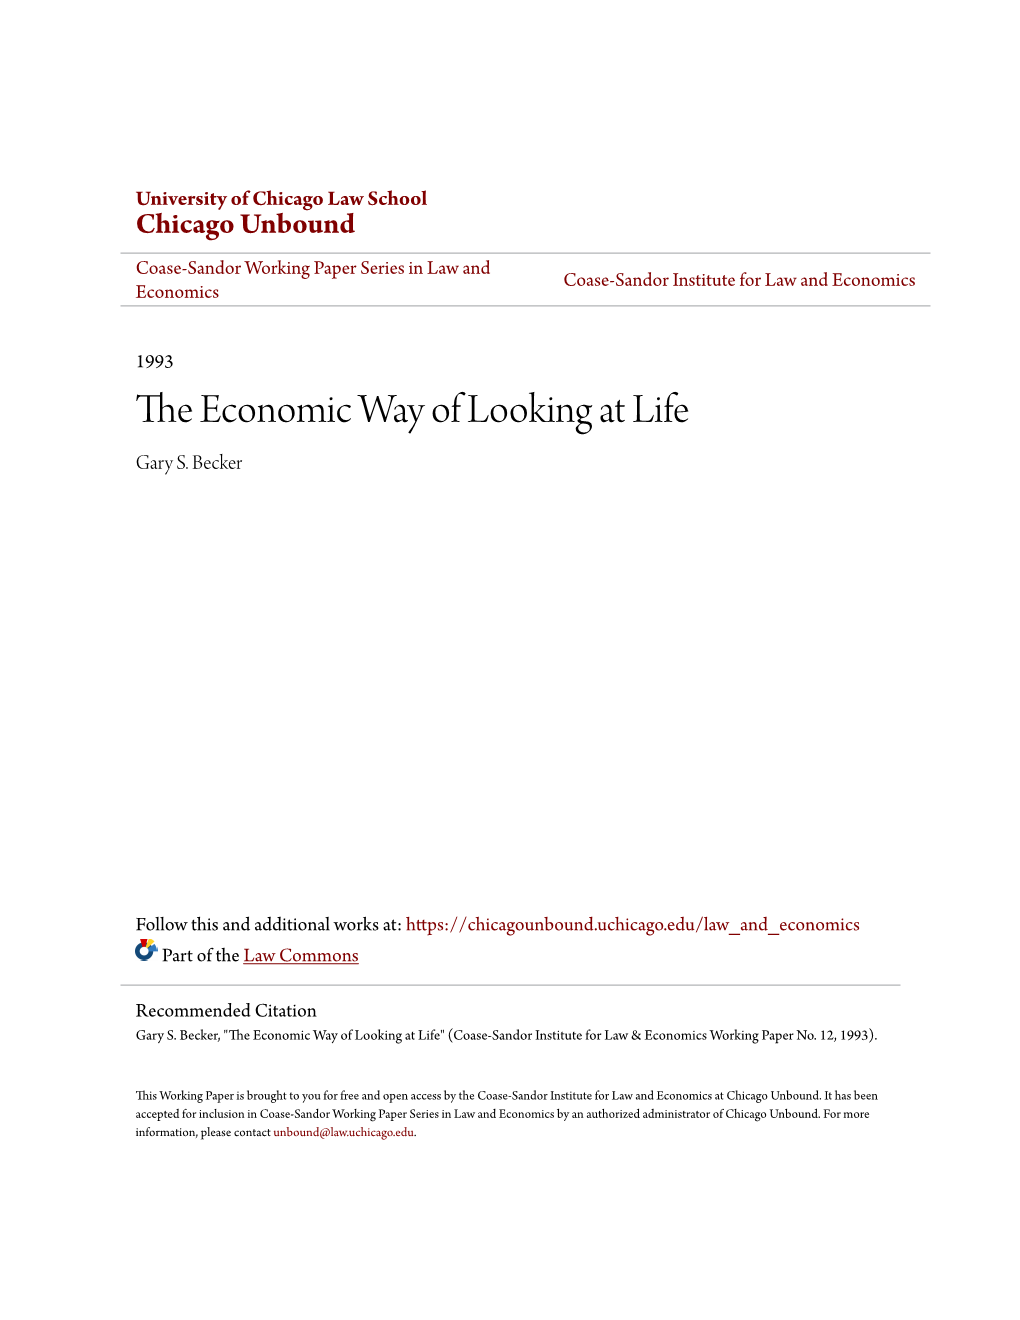 The Economic Way of Looking at Life